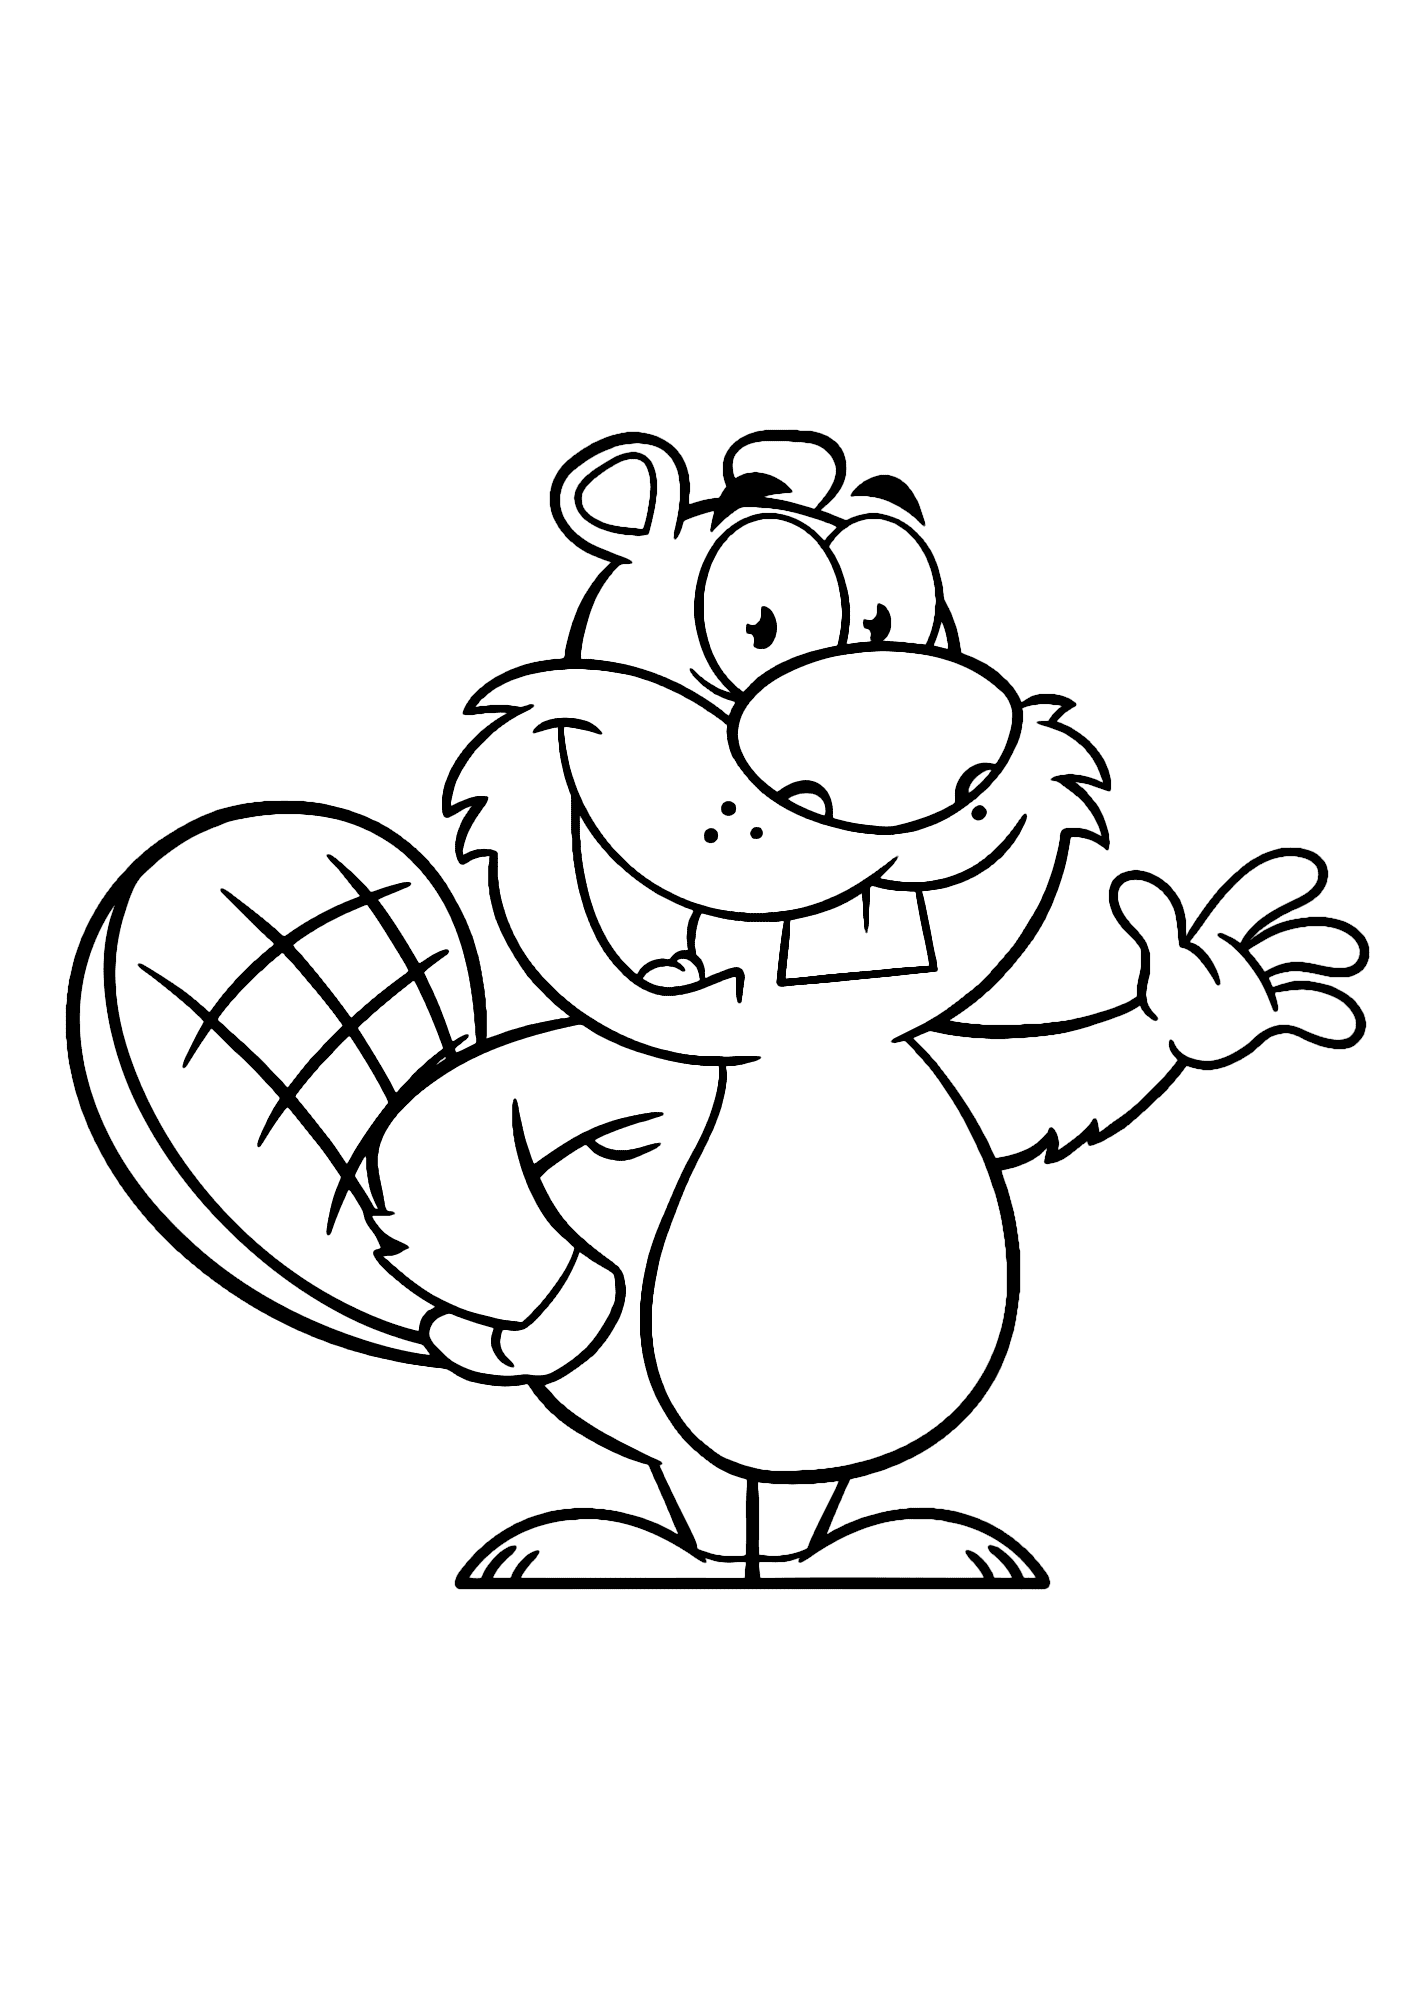 Imgae Of Beaver Coloring Page